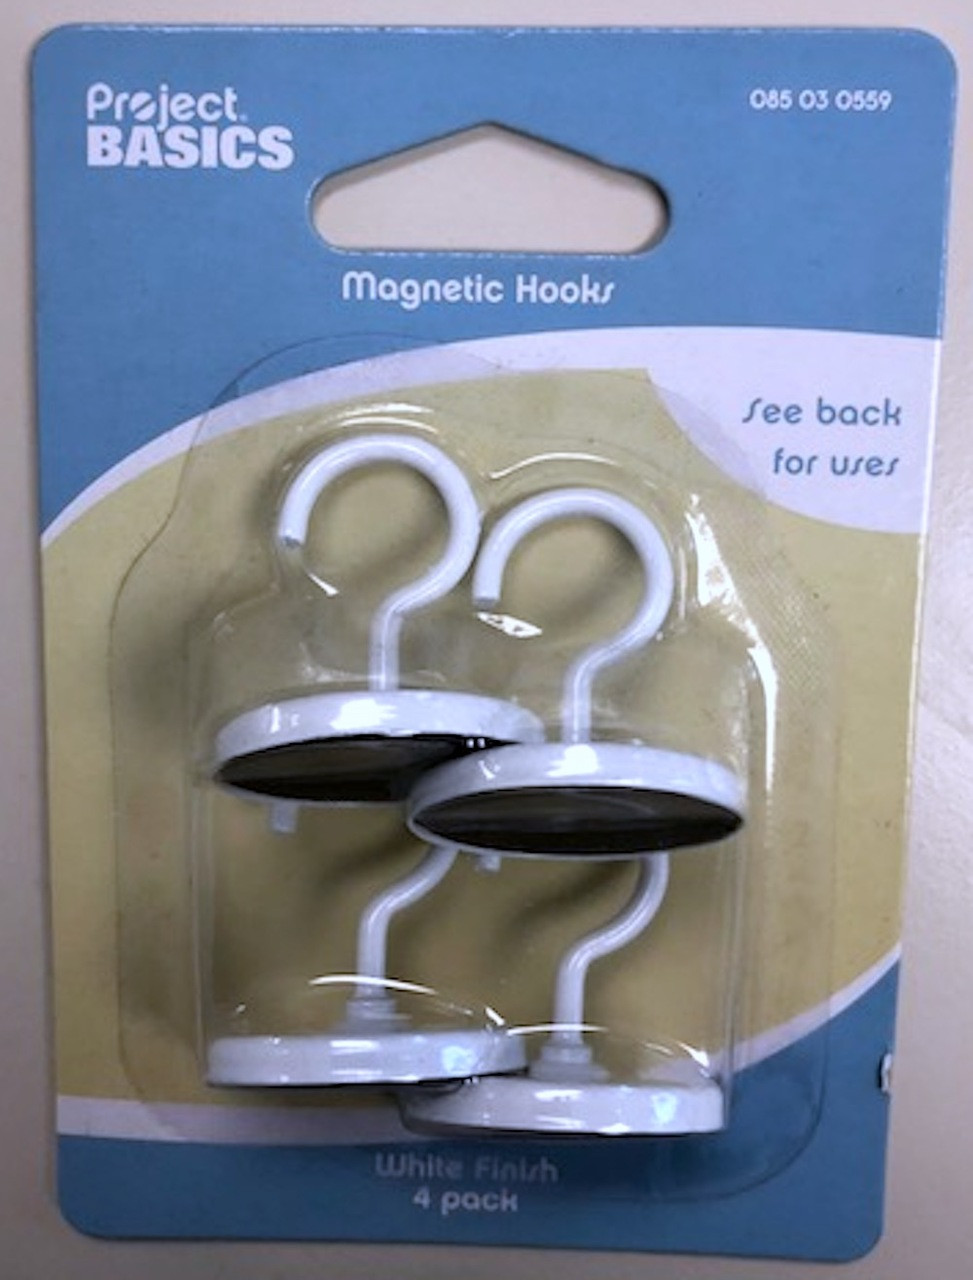 Project Basics 085-03-0559 White Magnetic Hook Coat and Hat Hook Pack of 4